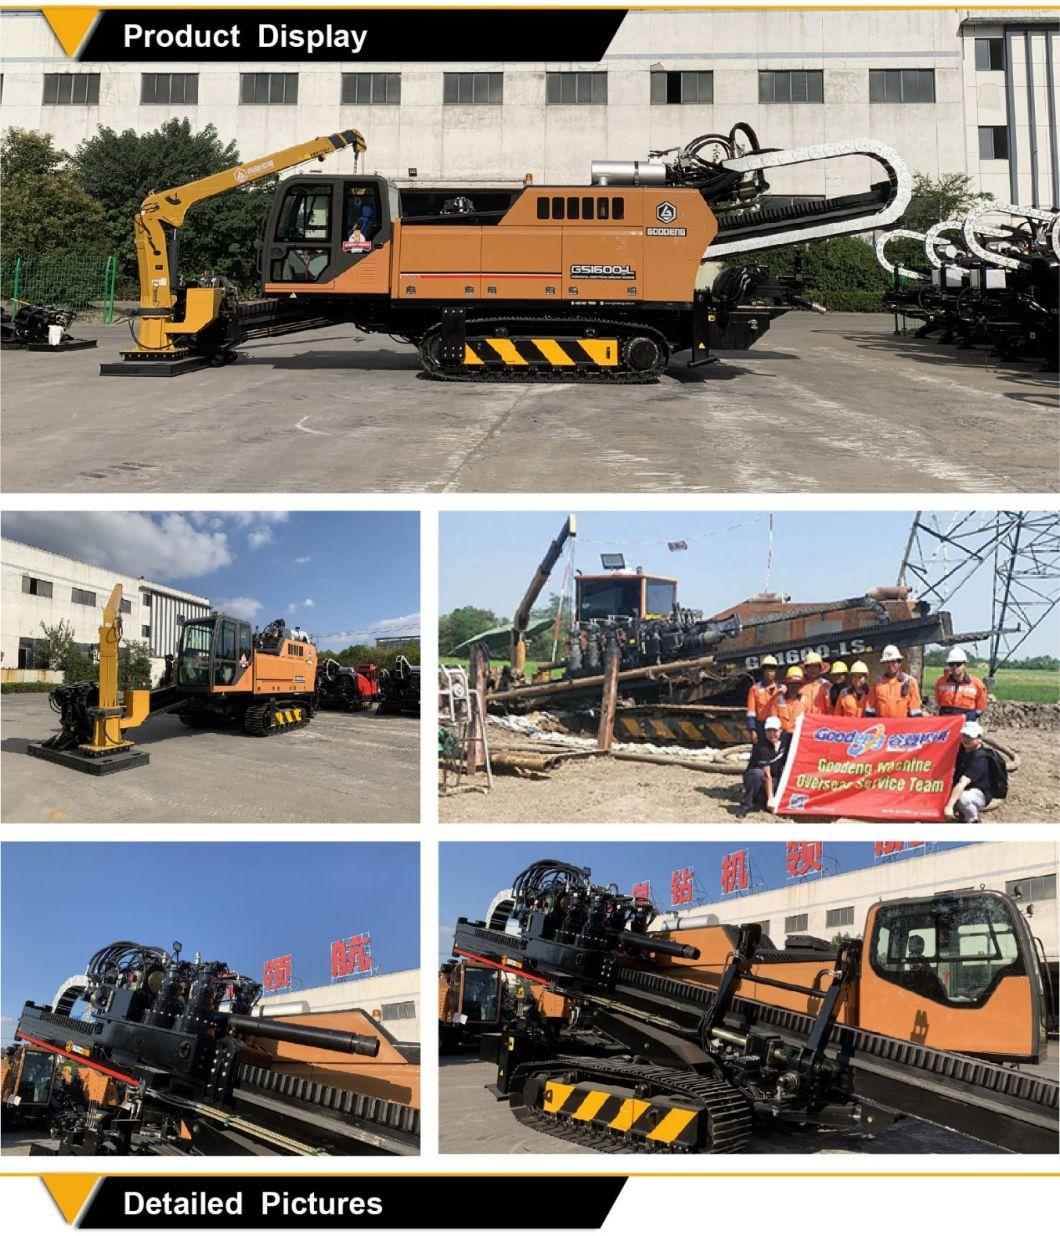 Goodeng GS1600-LS horizontal directional drilling rig with large cab